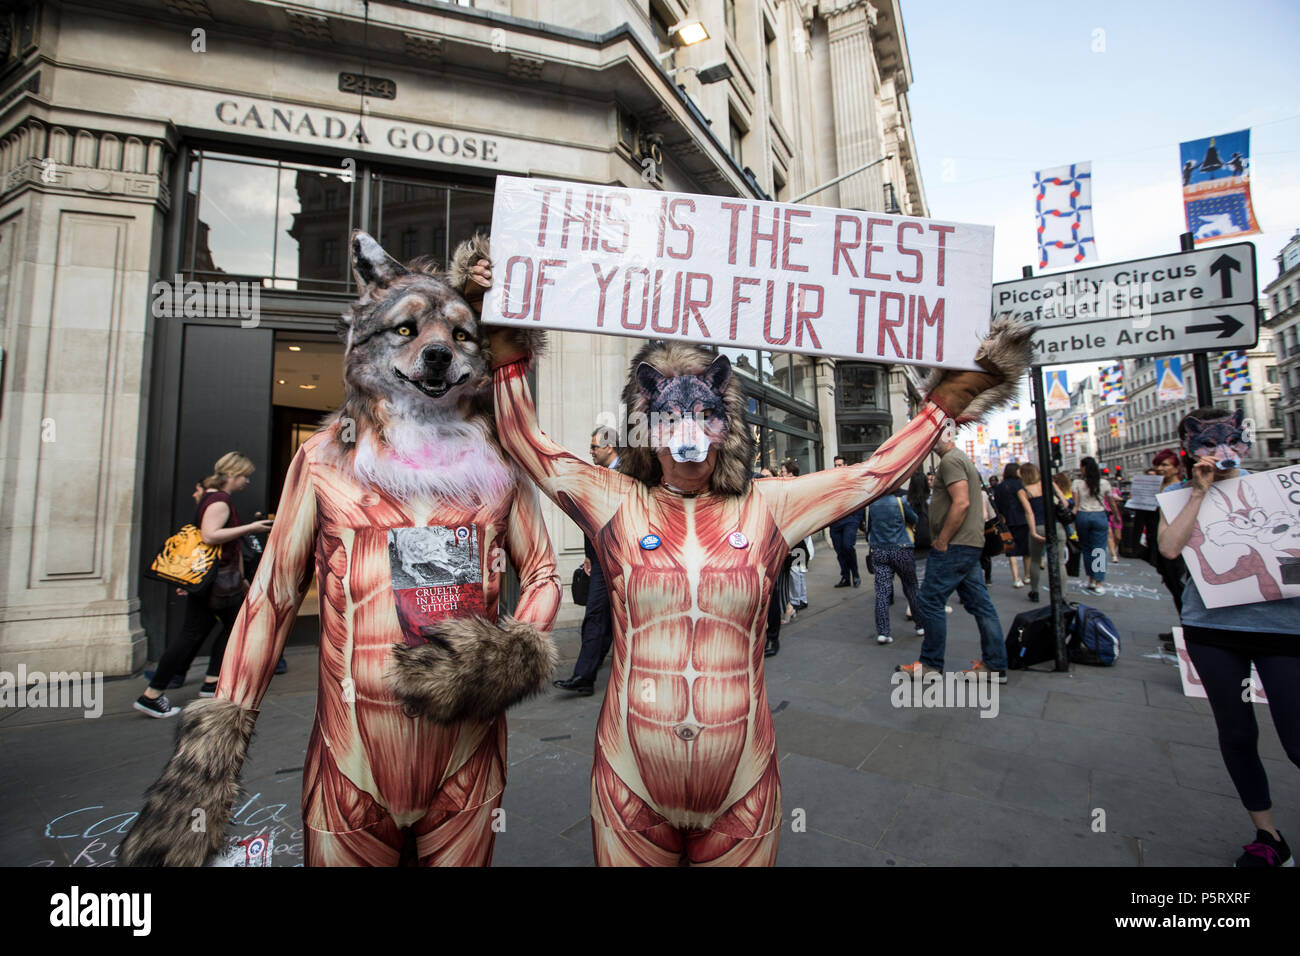 Campaigner's against Canada Goose clothing brand use of coyote-fur in clothing products protest outside the Regent Street branch in central London, UK Stock Photo